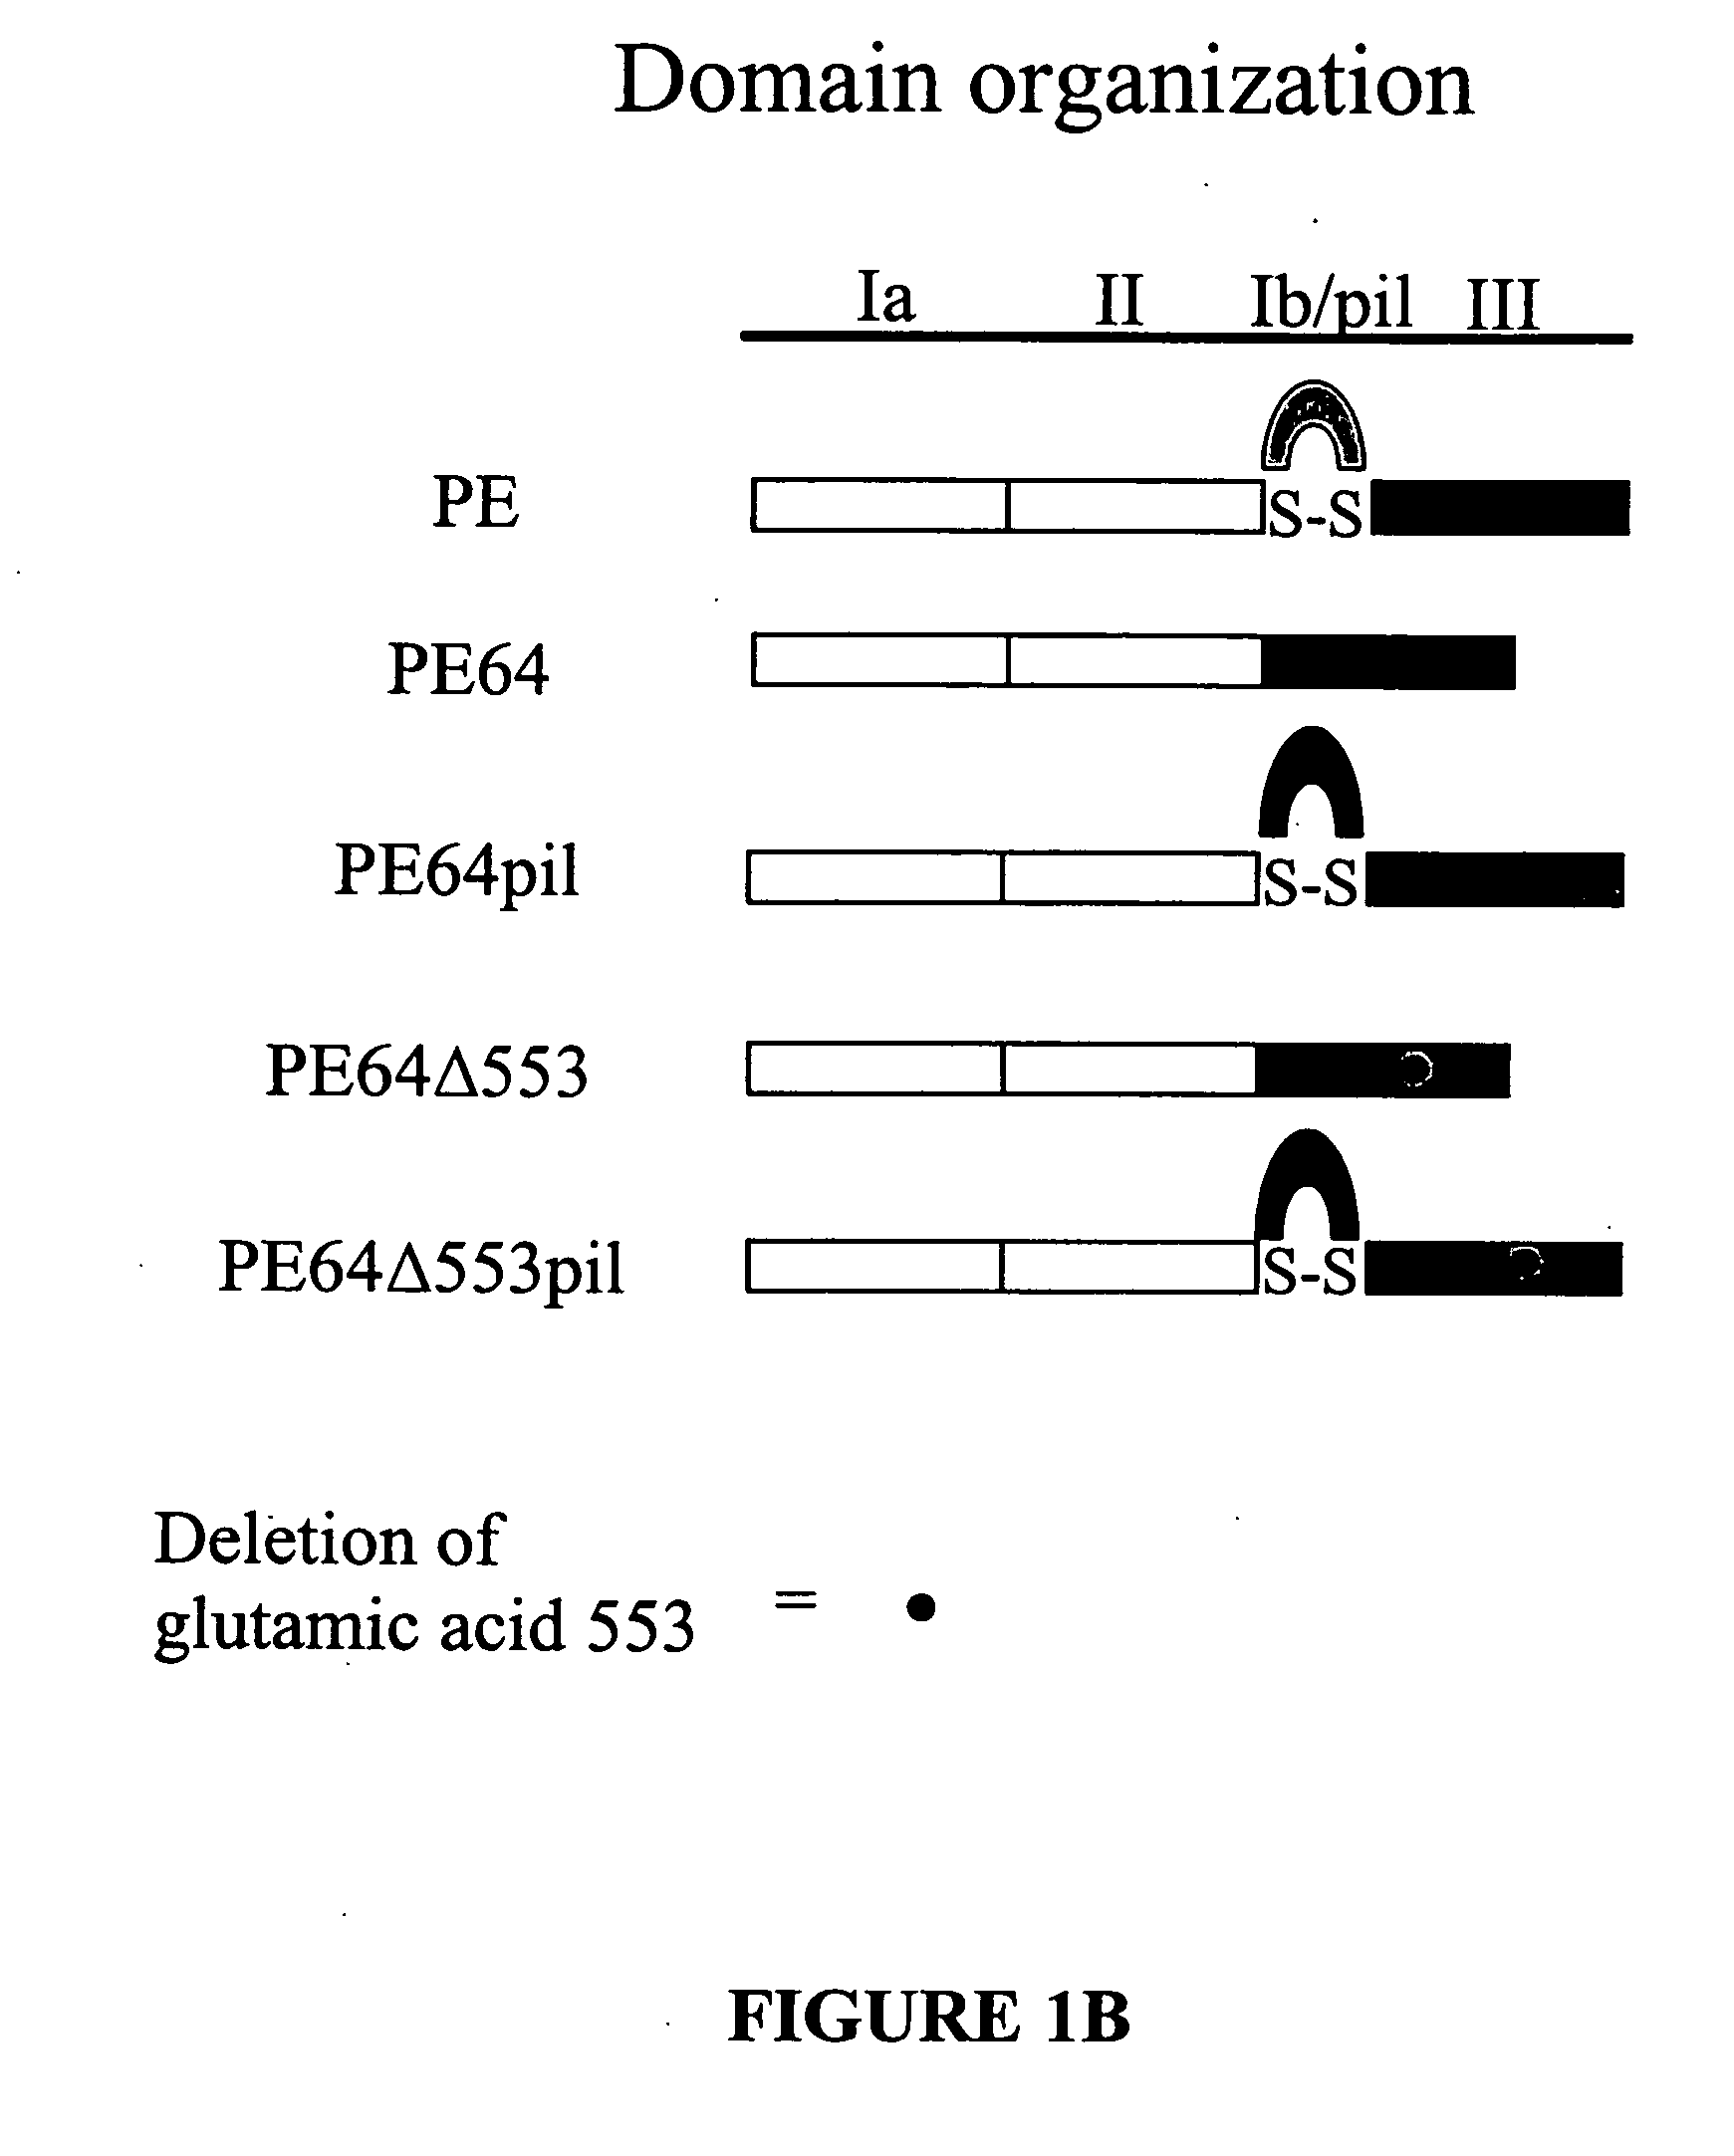 Chimeric protein comprising non-toxic pseudomonas exotoxin and type IV pilin sequences